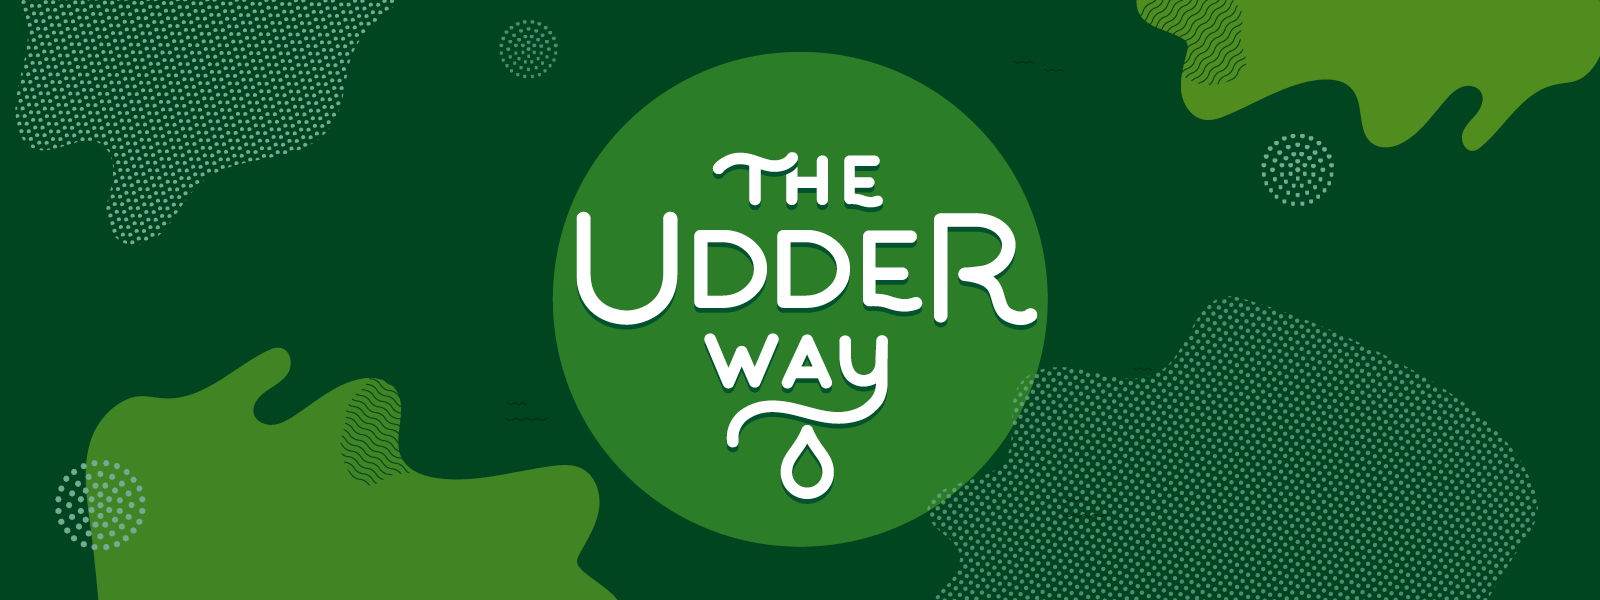 The Udder Way Campaign